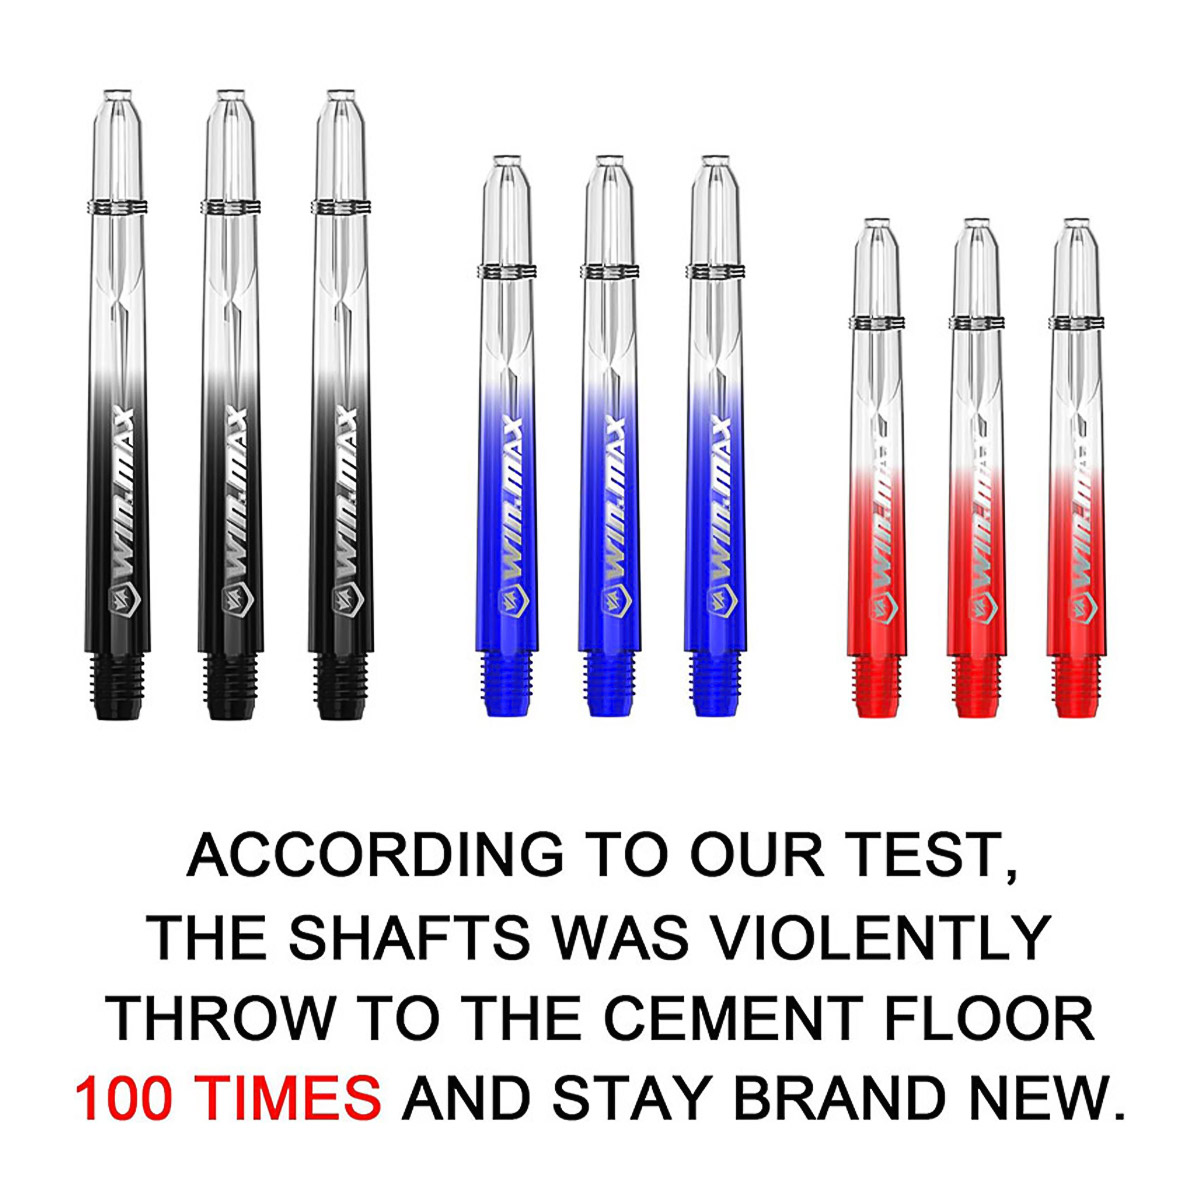 https://www.winmaxdartgame.com/18-darts-shafts-in-silver-metal-stem-spring-rings-and-9-dart-flights-win-max-product/